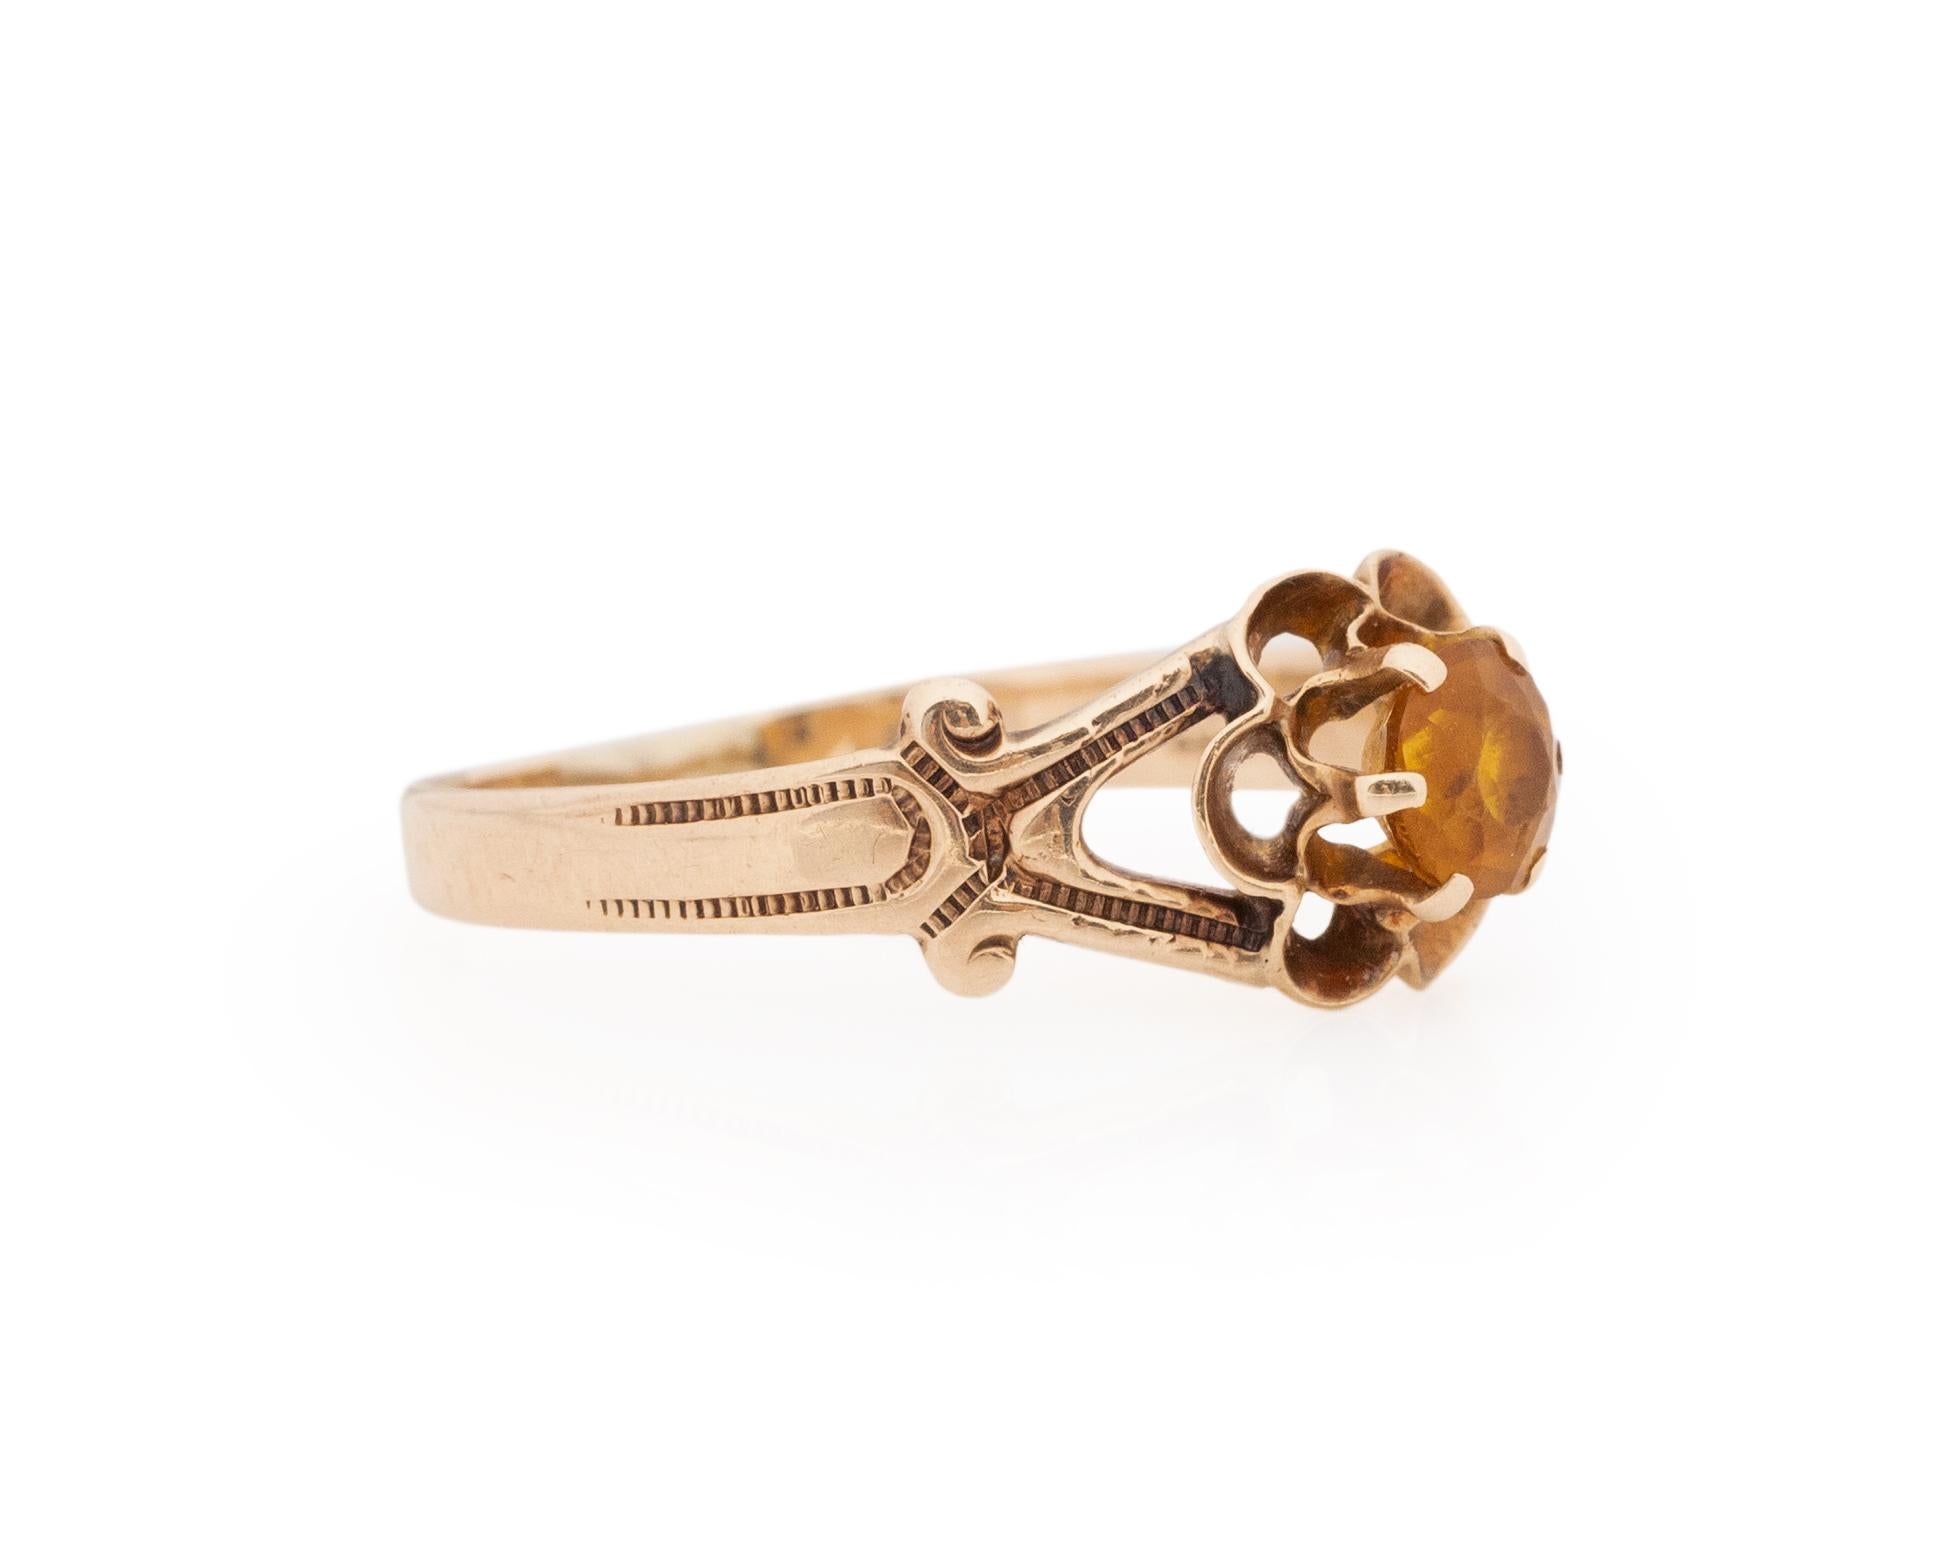 Buttercup style rings like this come from the Victorian Era, symbolizing good fortune and joy this piece has all the good vibes. Crafted in 10K yellow gold, the scrolling split shank design leads beautifully to the solitaire buttercup in the center.